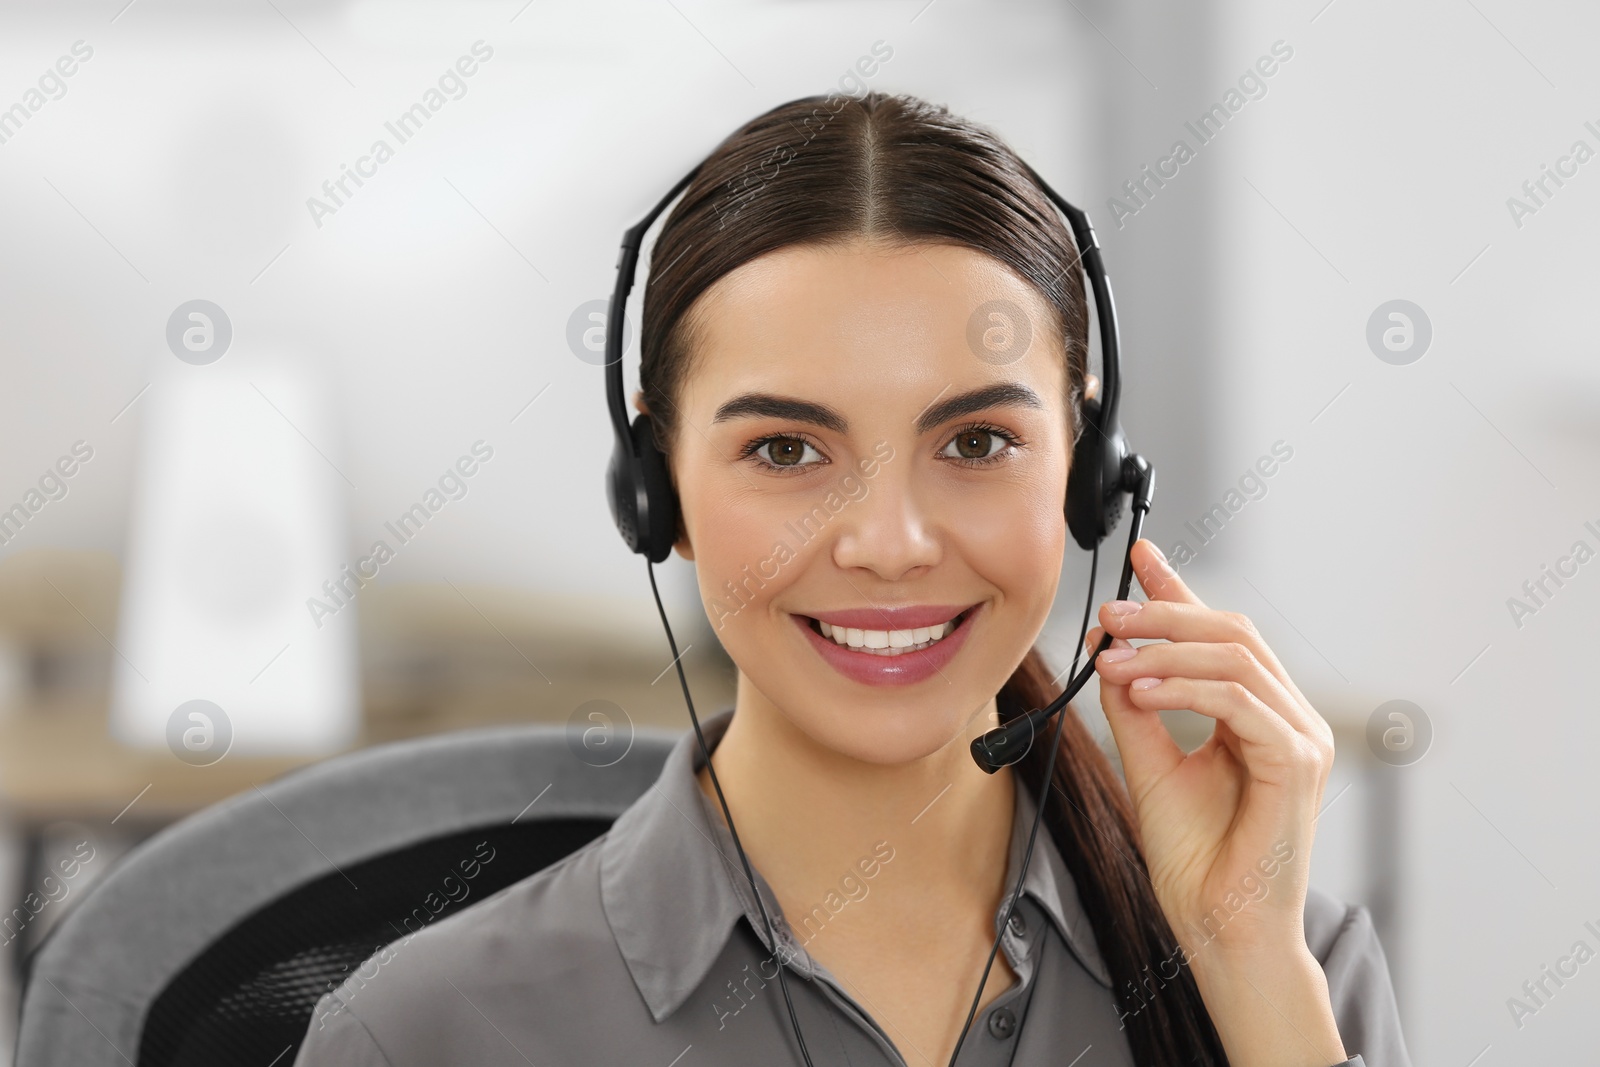 Photo of Hotline operator with headset working in office